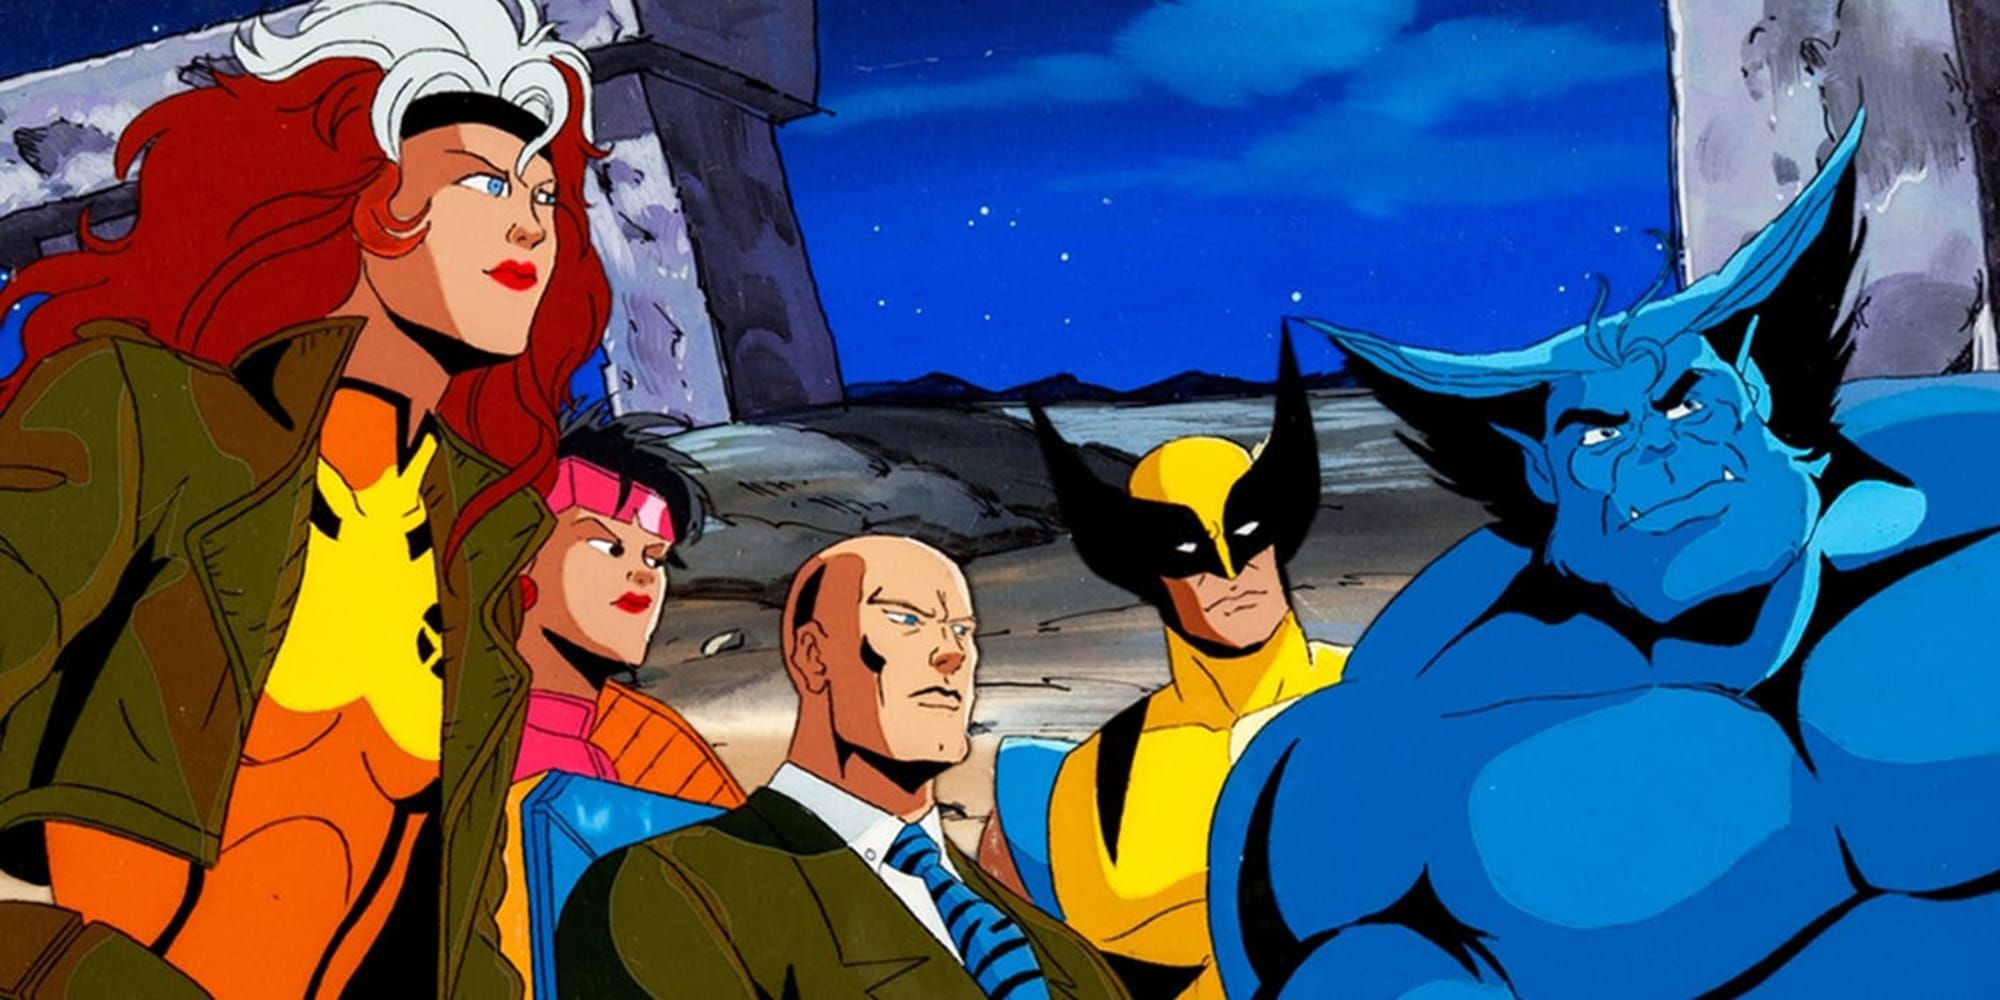 Beast Rogue, Professor X, Jubilee and Wolverine posing next to each other in X-Men: The Animated Series